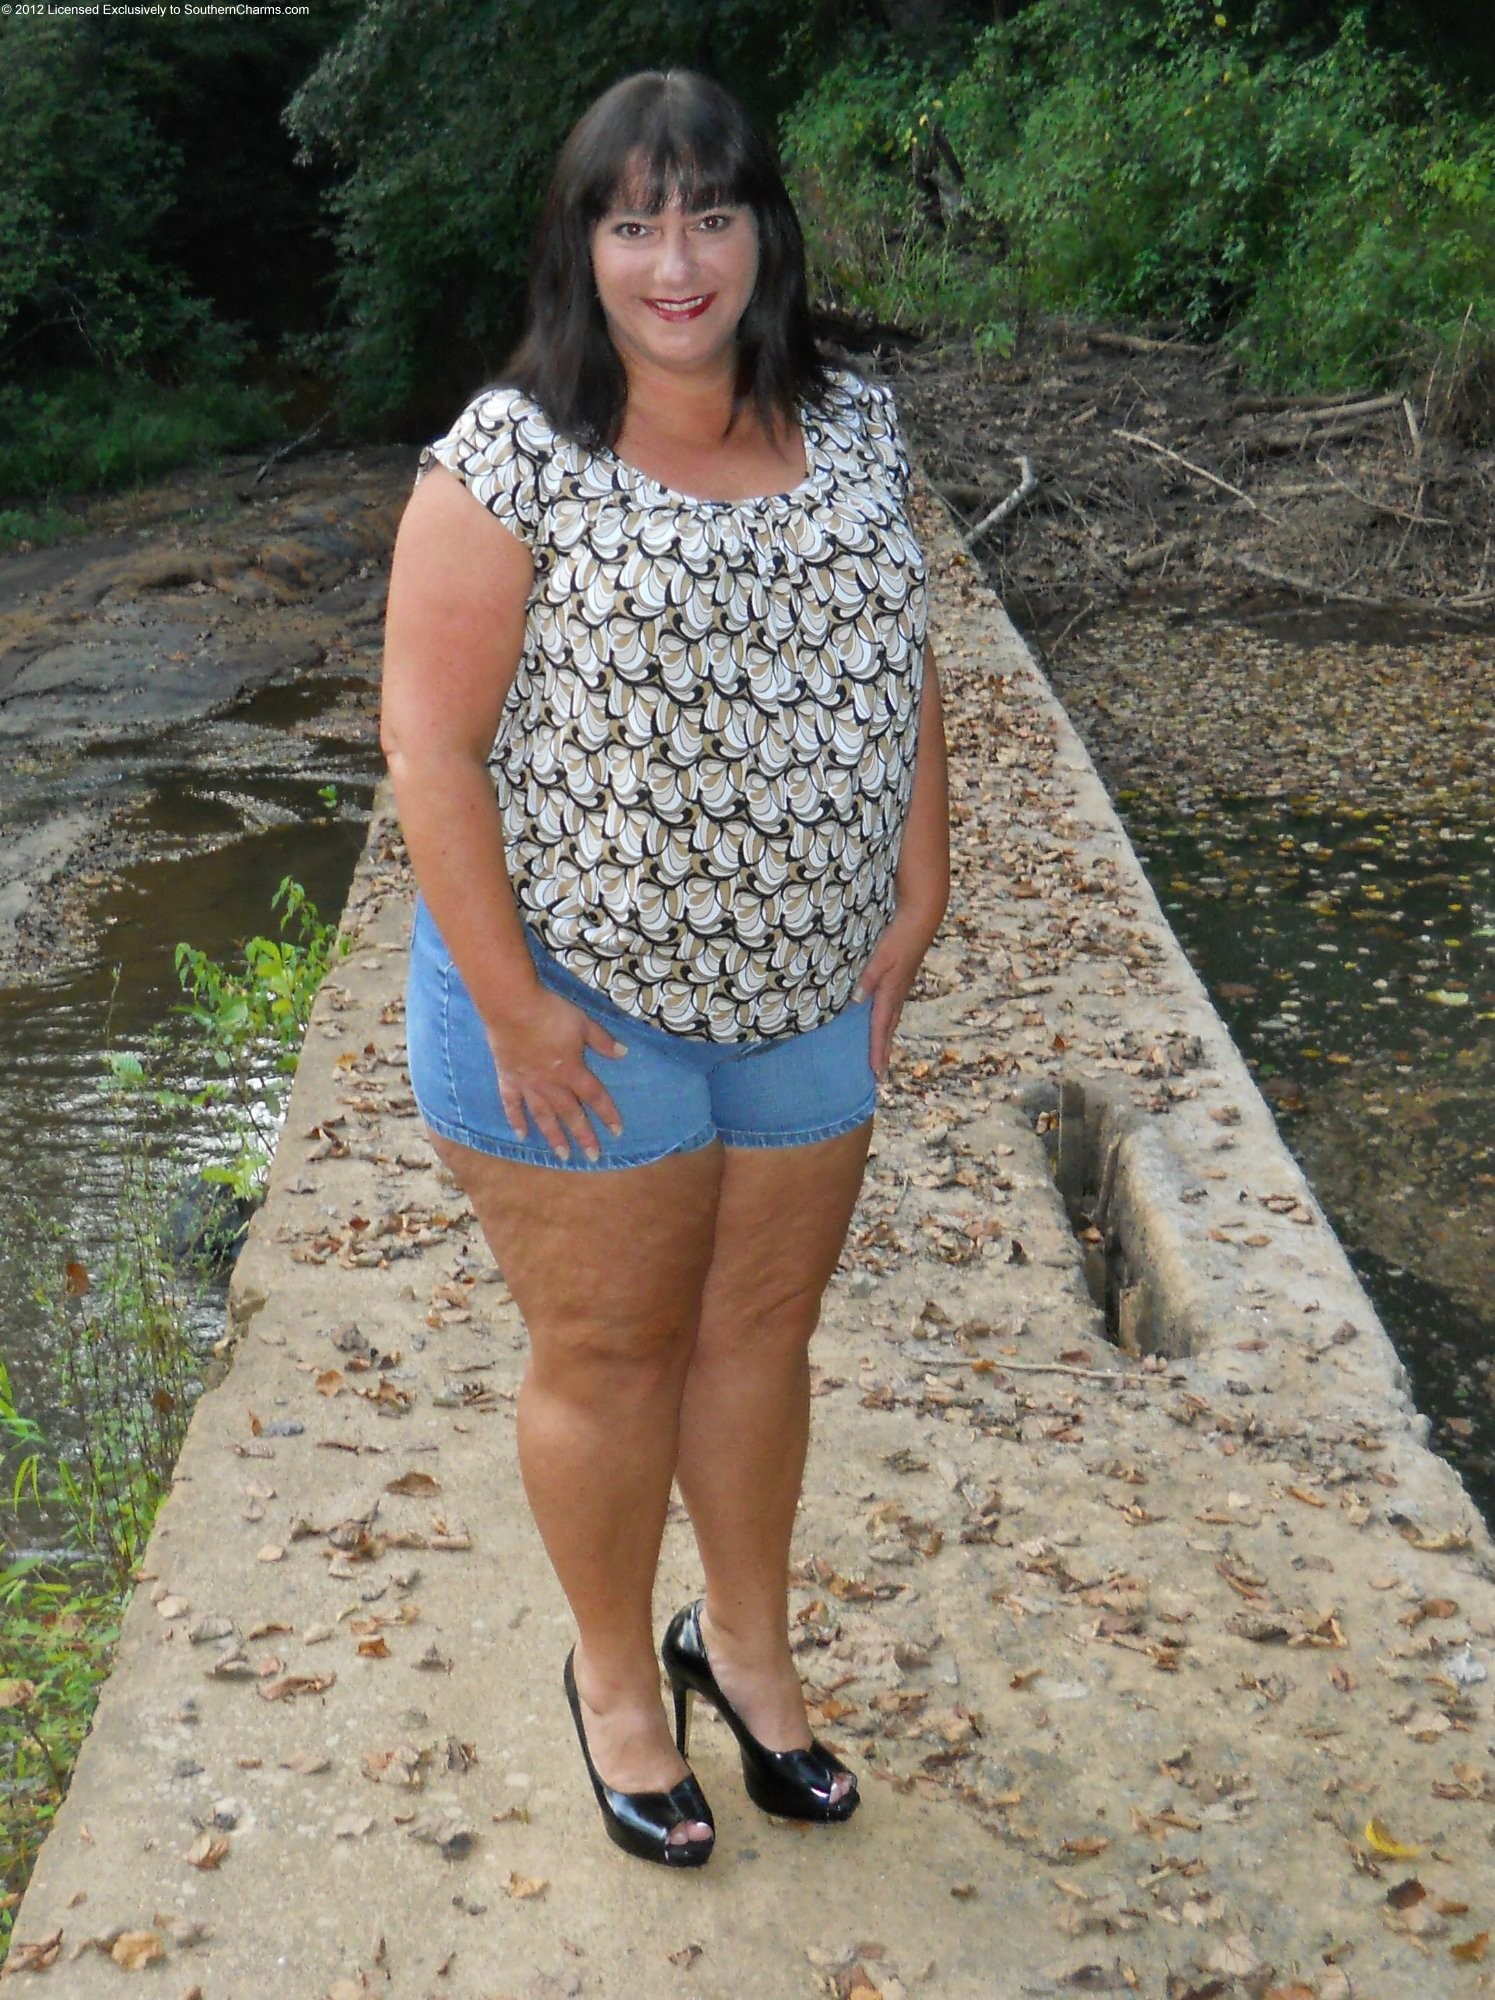 Click Here to see the Rest of the Southern Charms.